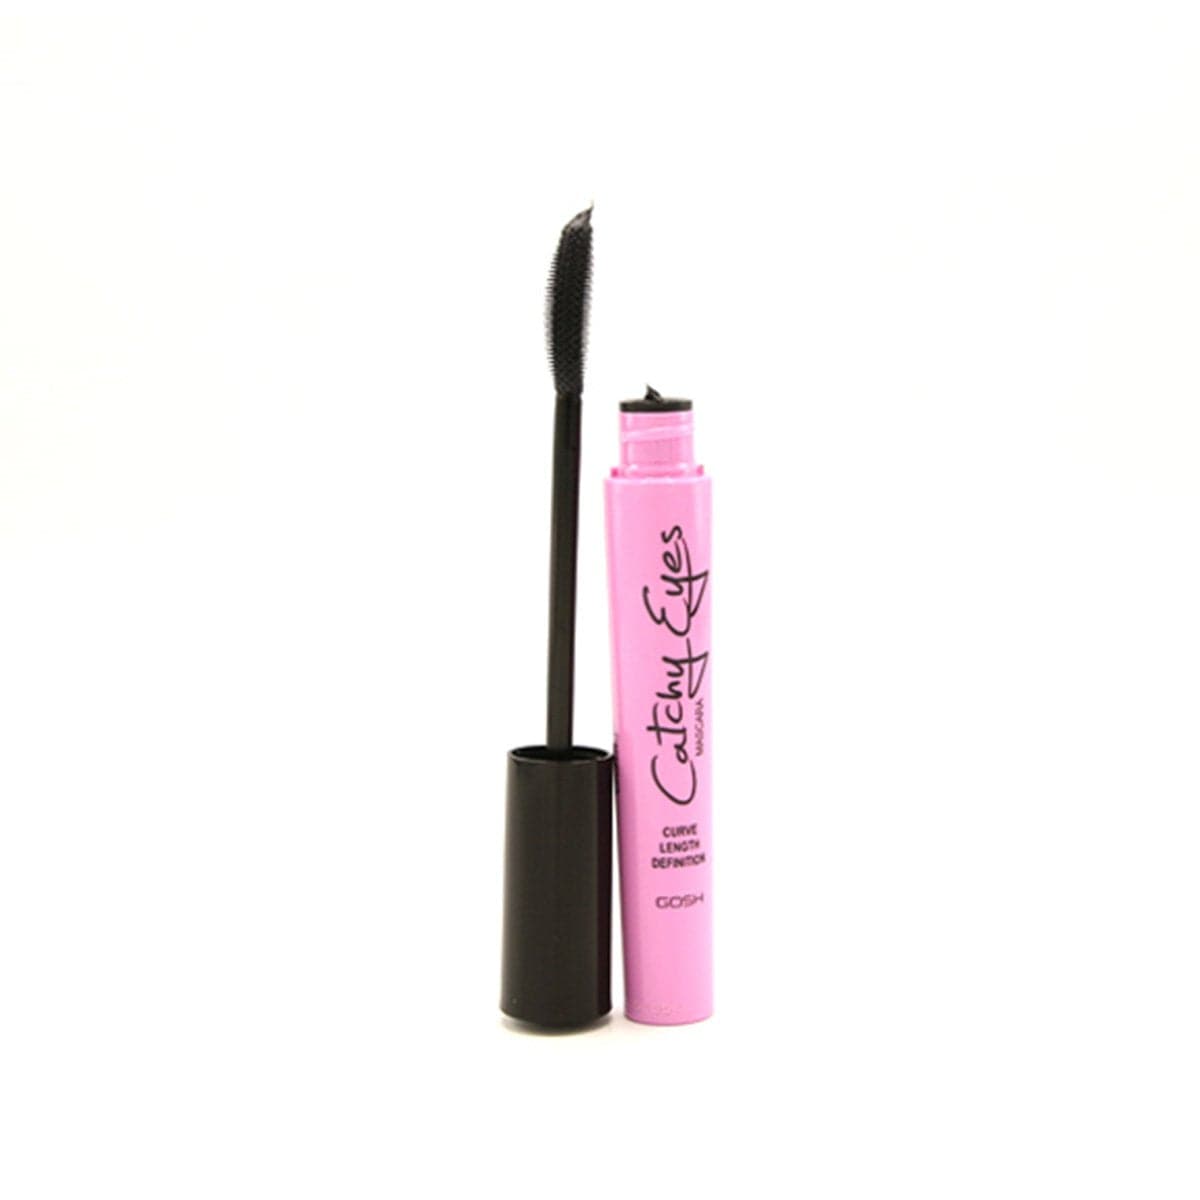 Gosh Catchy Eyes Mascara Black - Premium Health & Beauty from GOSH - Just Rs 1720.00! Shop now at Cozmetica